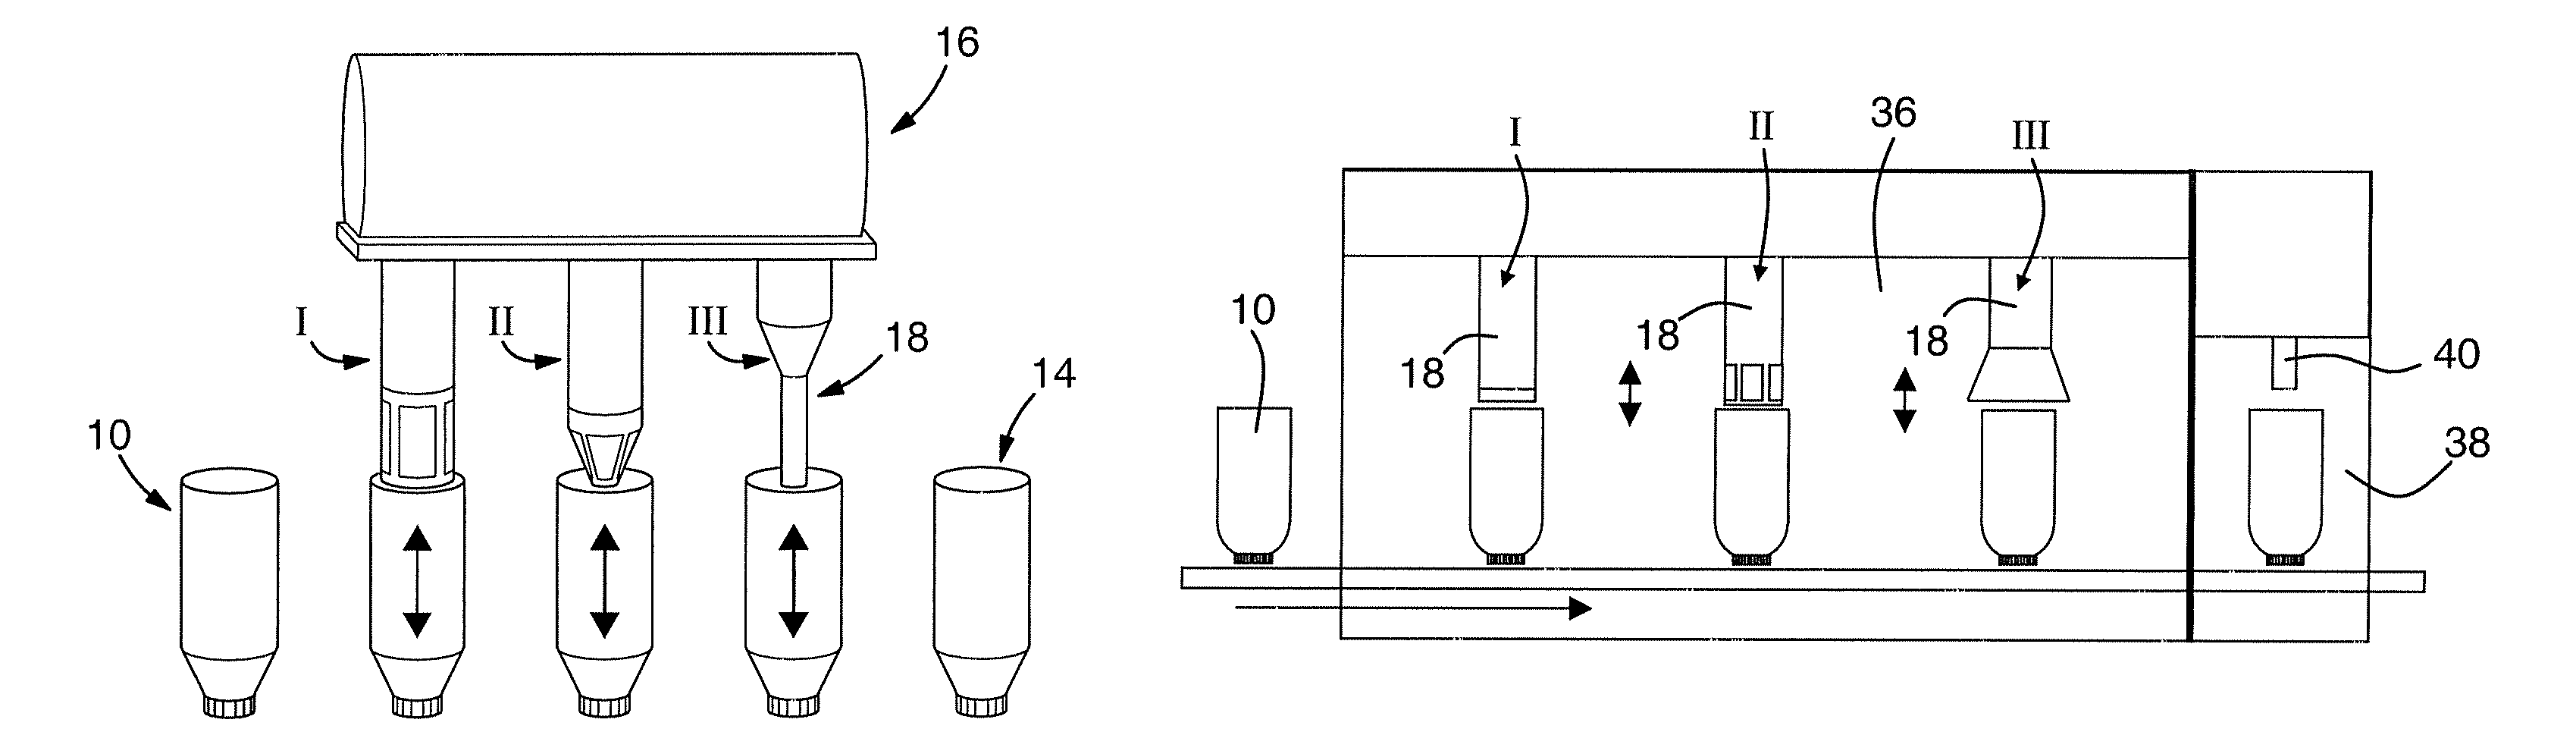 Method of sterilizing packages